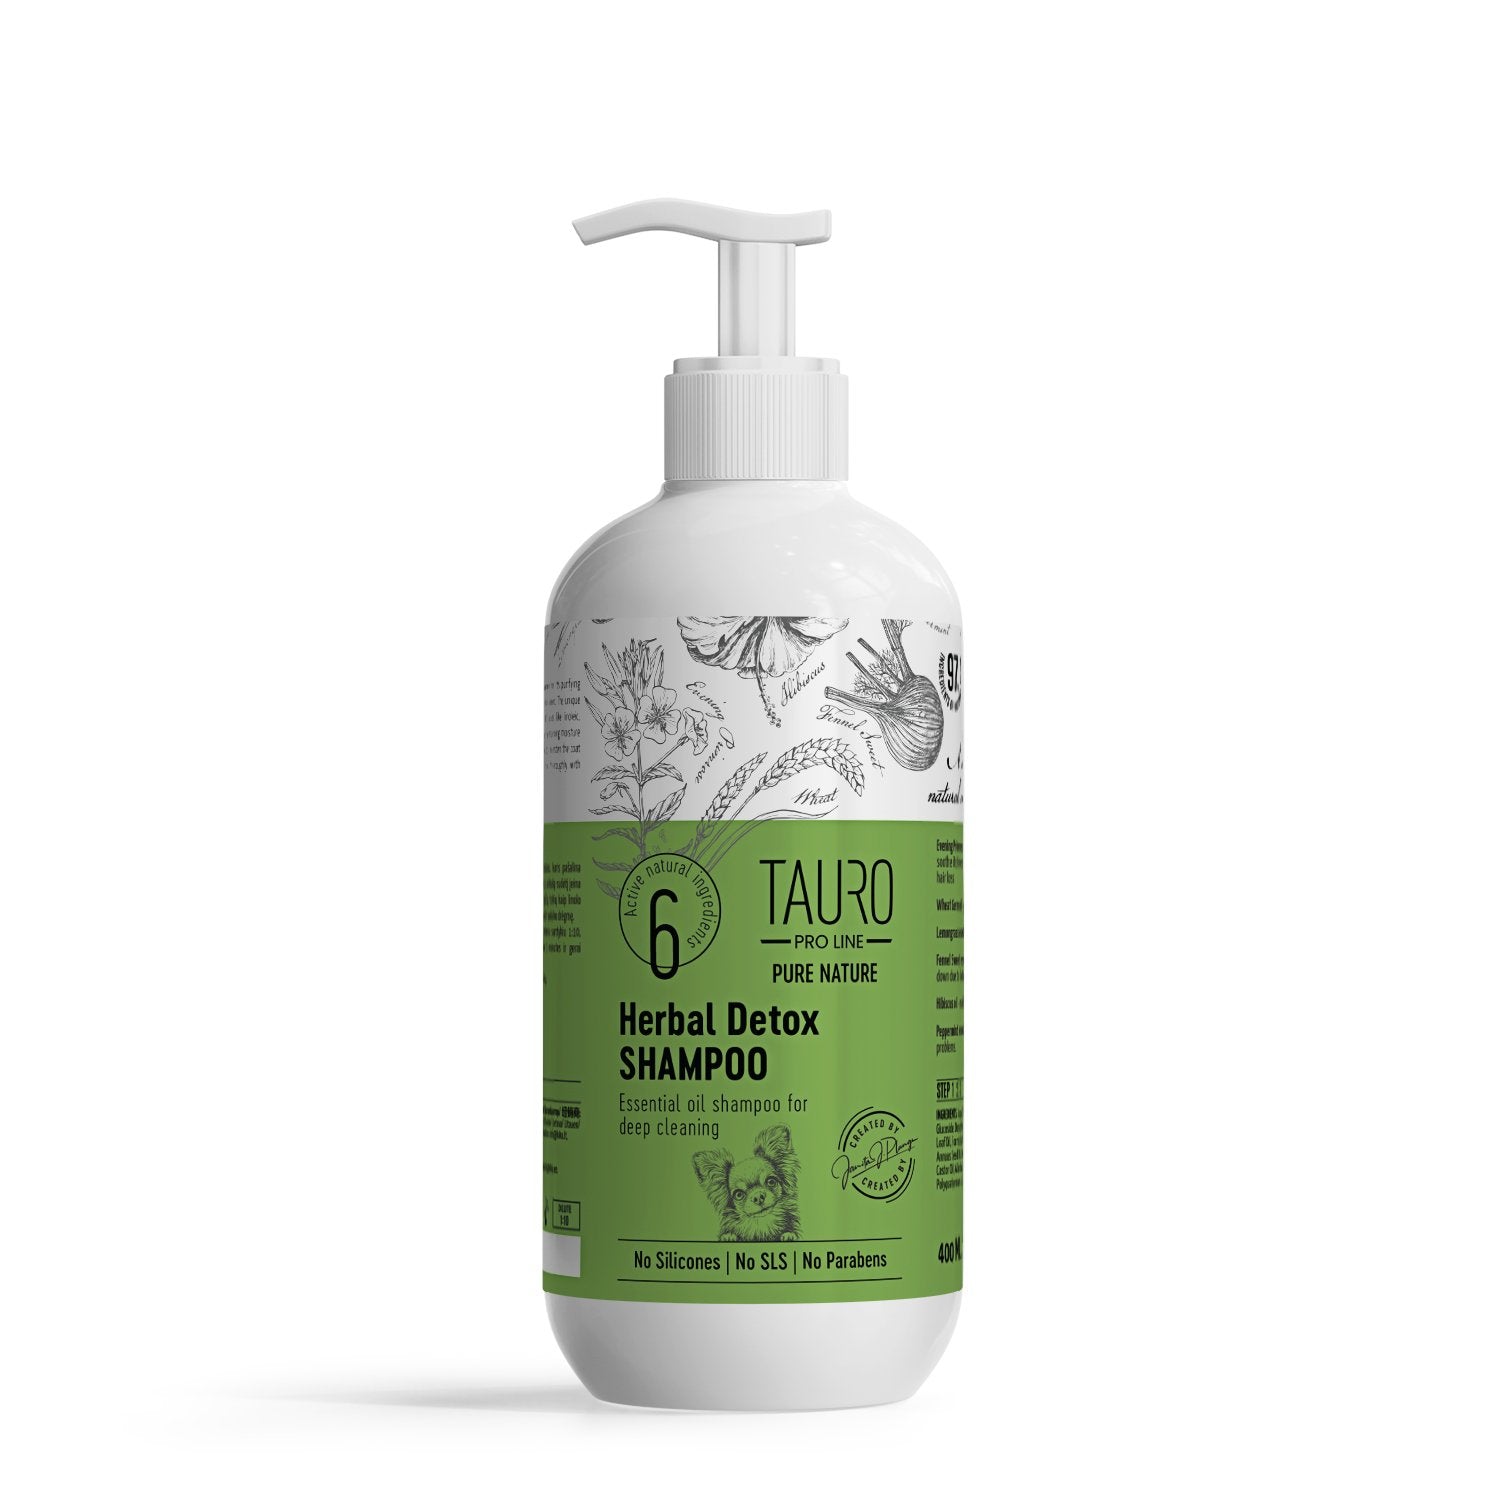 Pro online Buy Pro Line Tauro Shampoo: your Tauro brand, favorite Line from shampoo